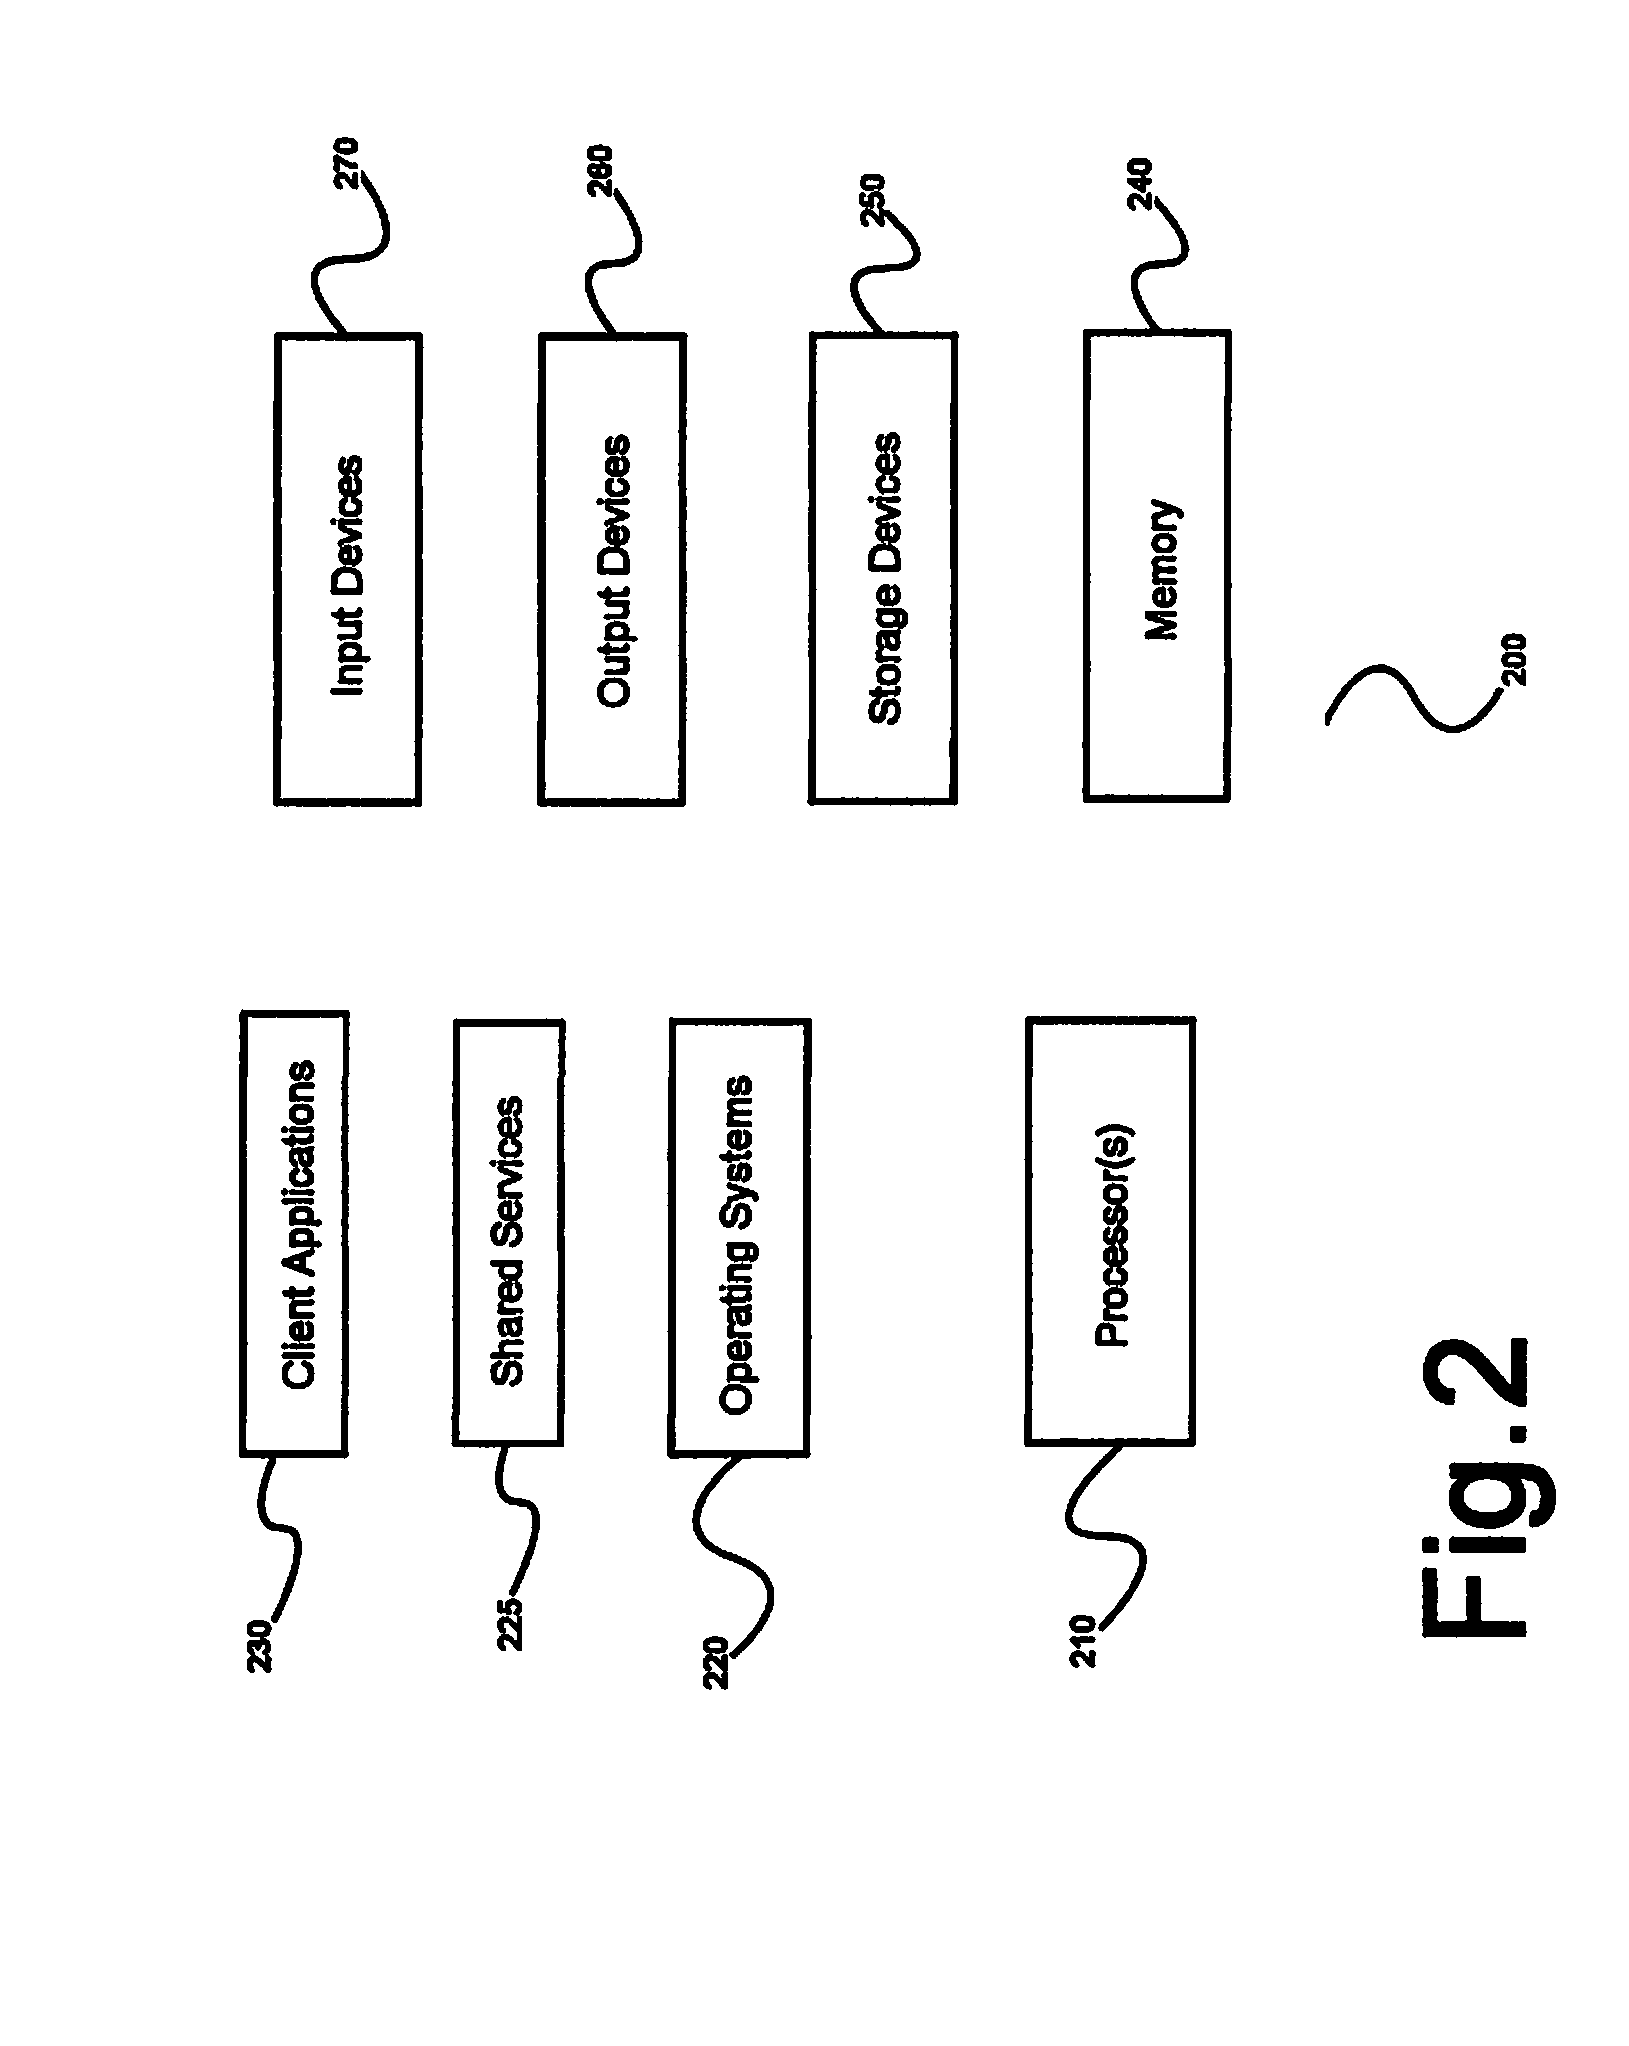 System and method for client interaction application integration